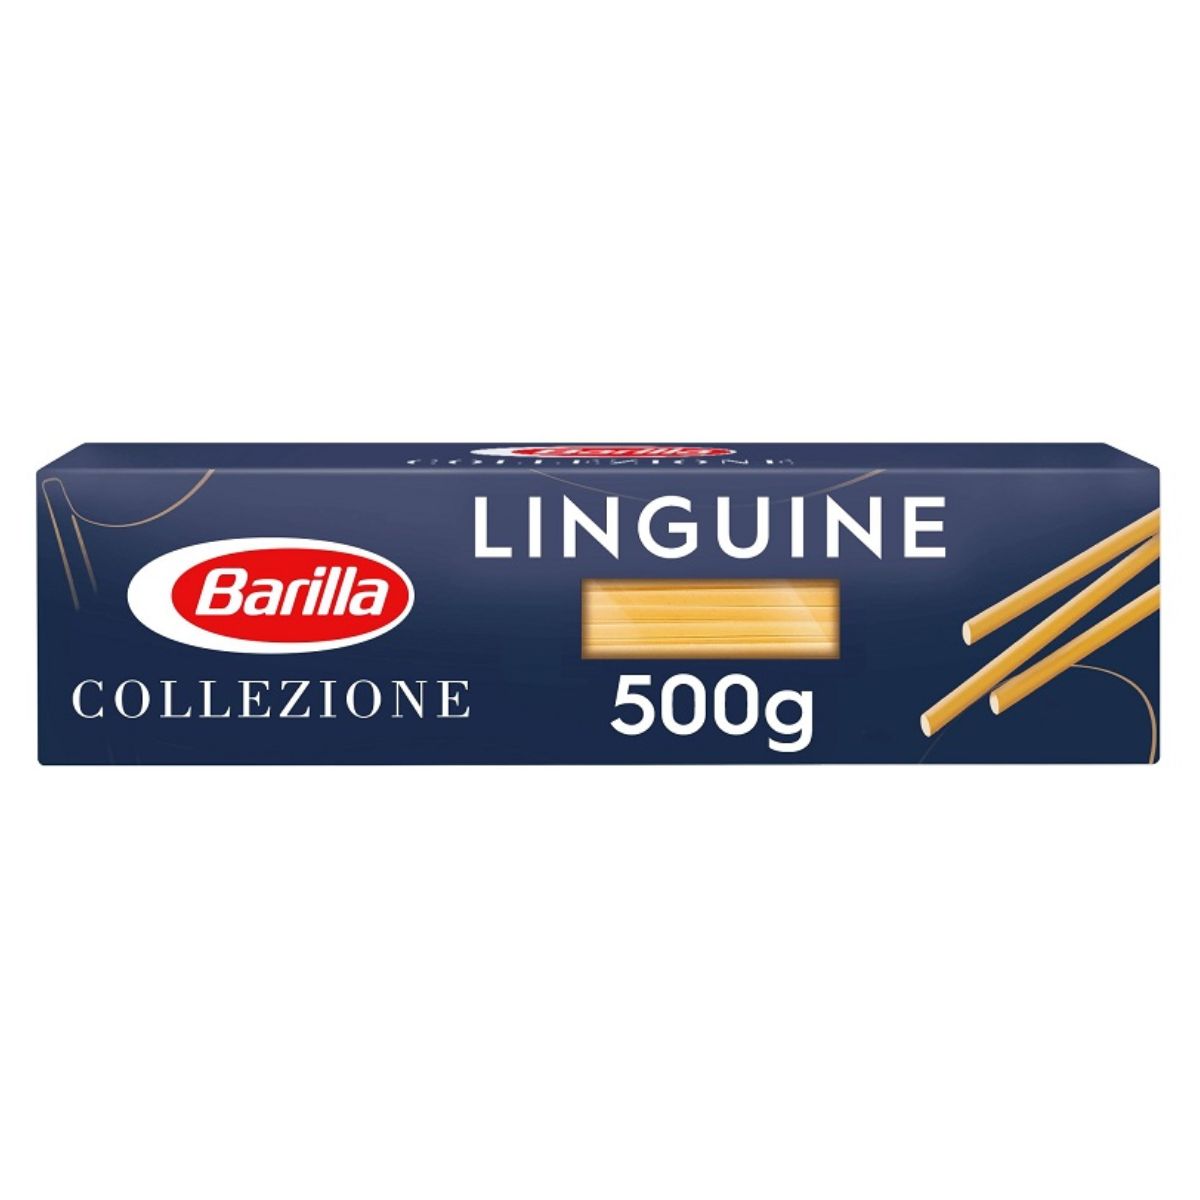 A package of Barilla - Pasta Linguine - 500g.